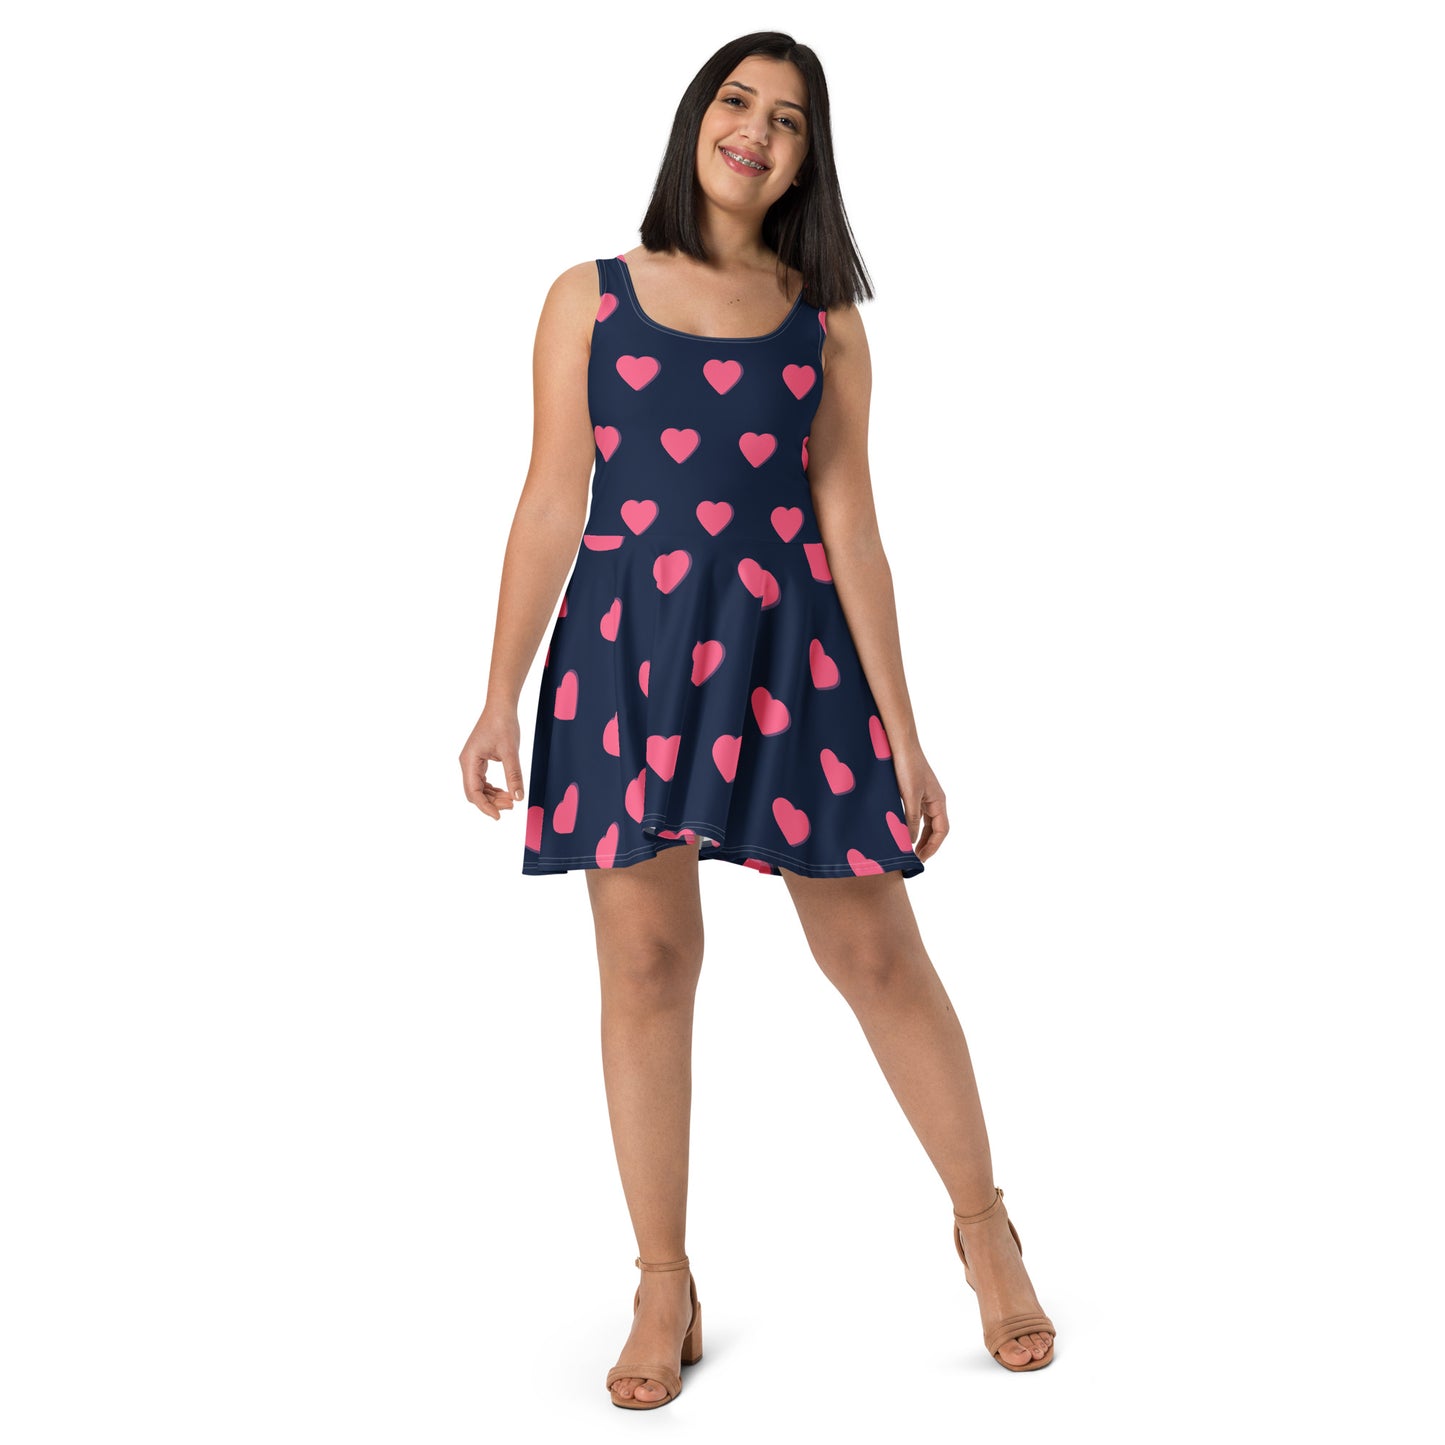 Woman with blue skater dress with hearts 